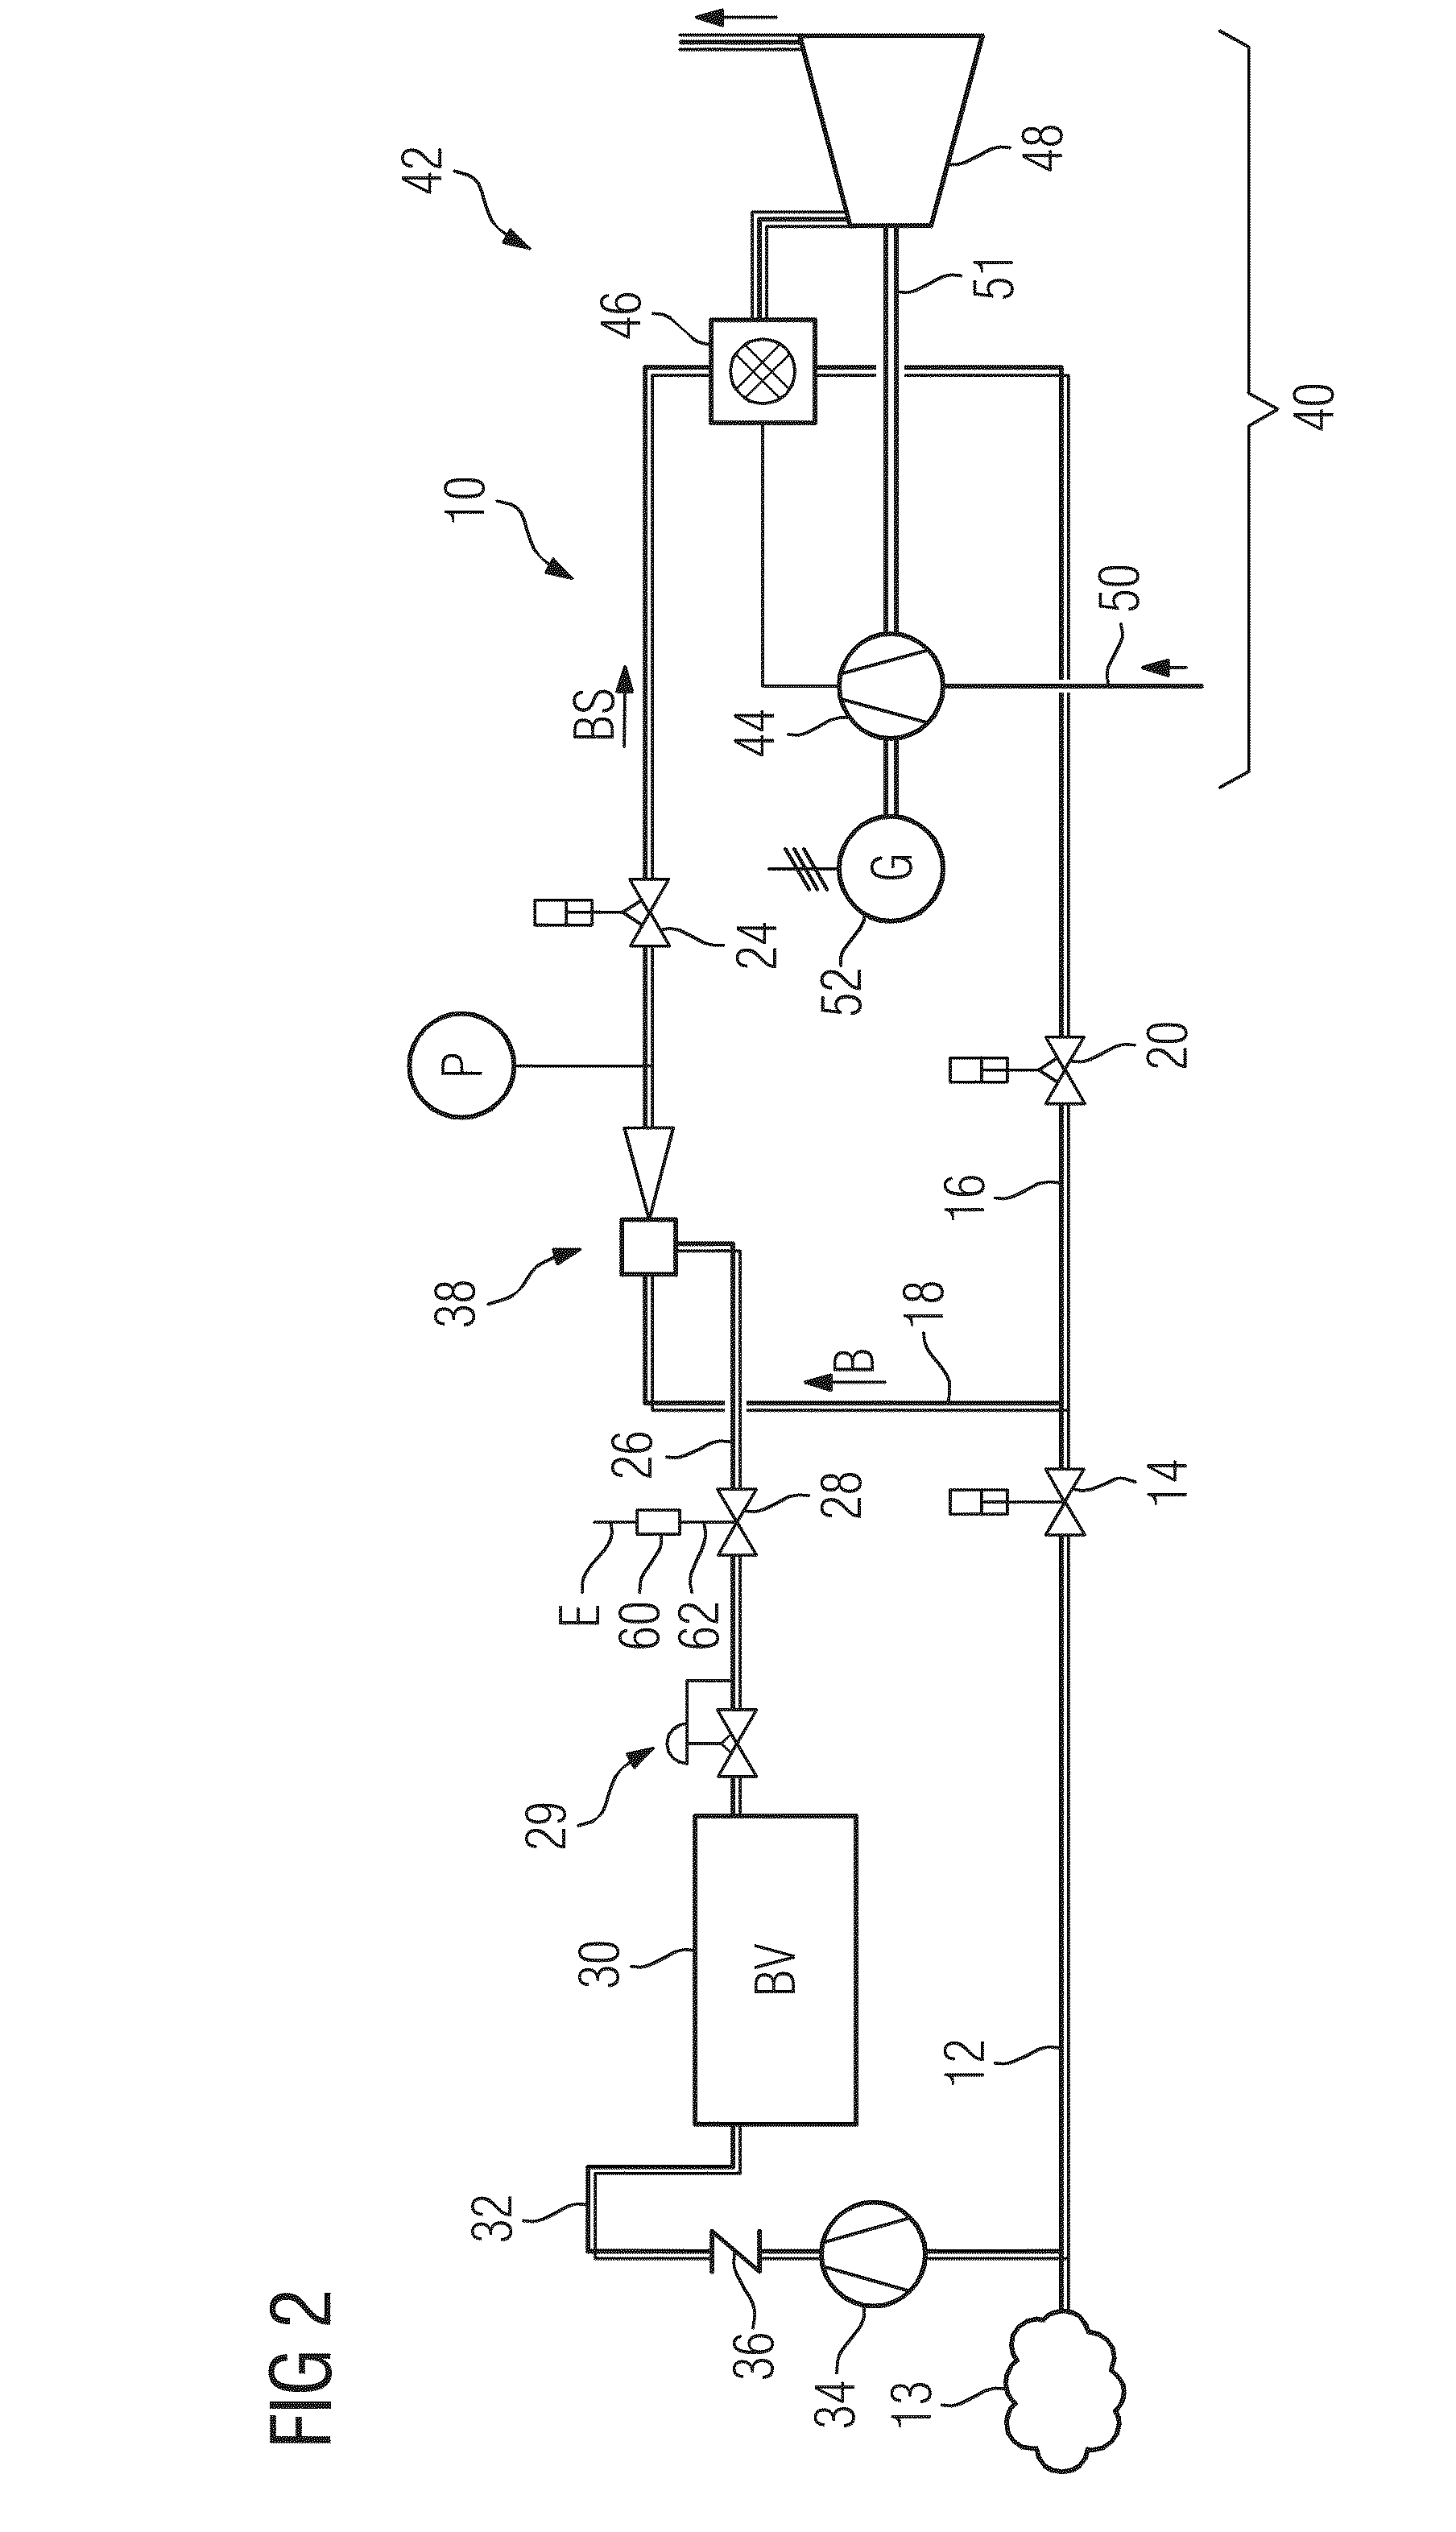 Method for operating a fixed gas turbine, device for regulating the operation of a gas turbine and power plant